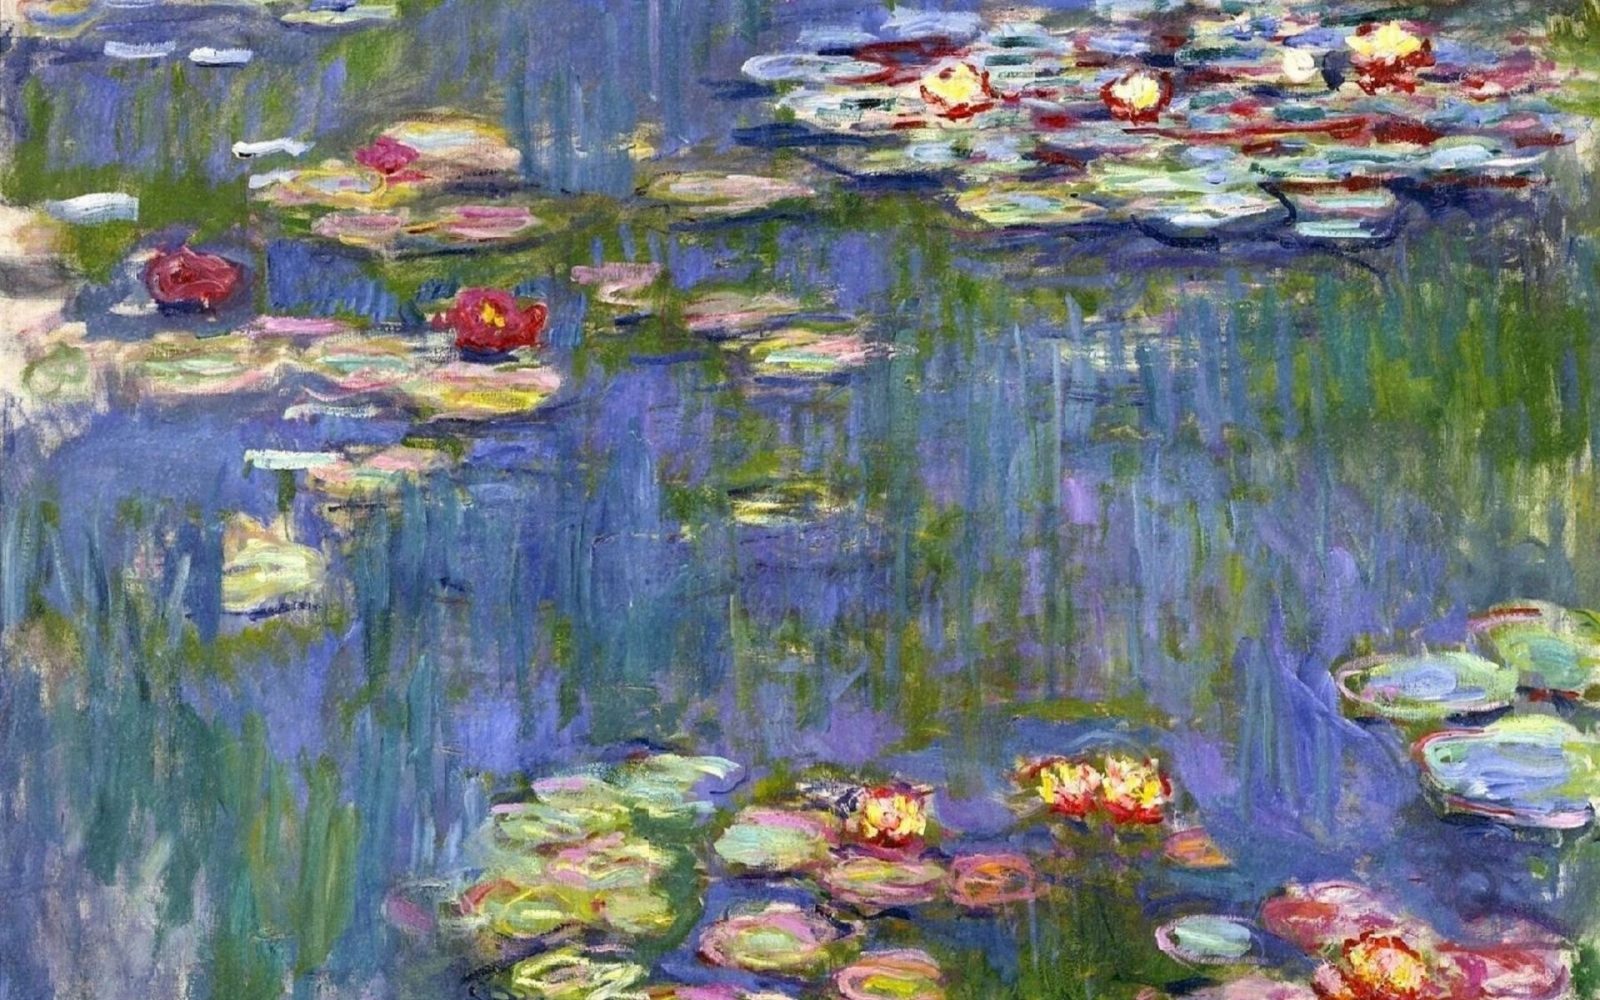 Hey, We Bet You Can’t Get Better Than 80% On This Random Knowledge Quiz Water Lilies painting by Claude Monet